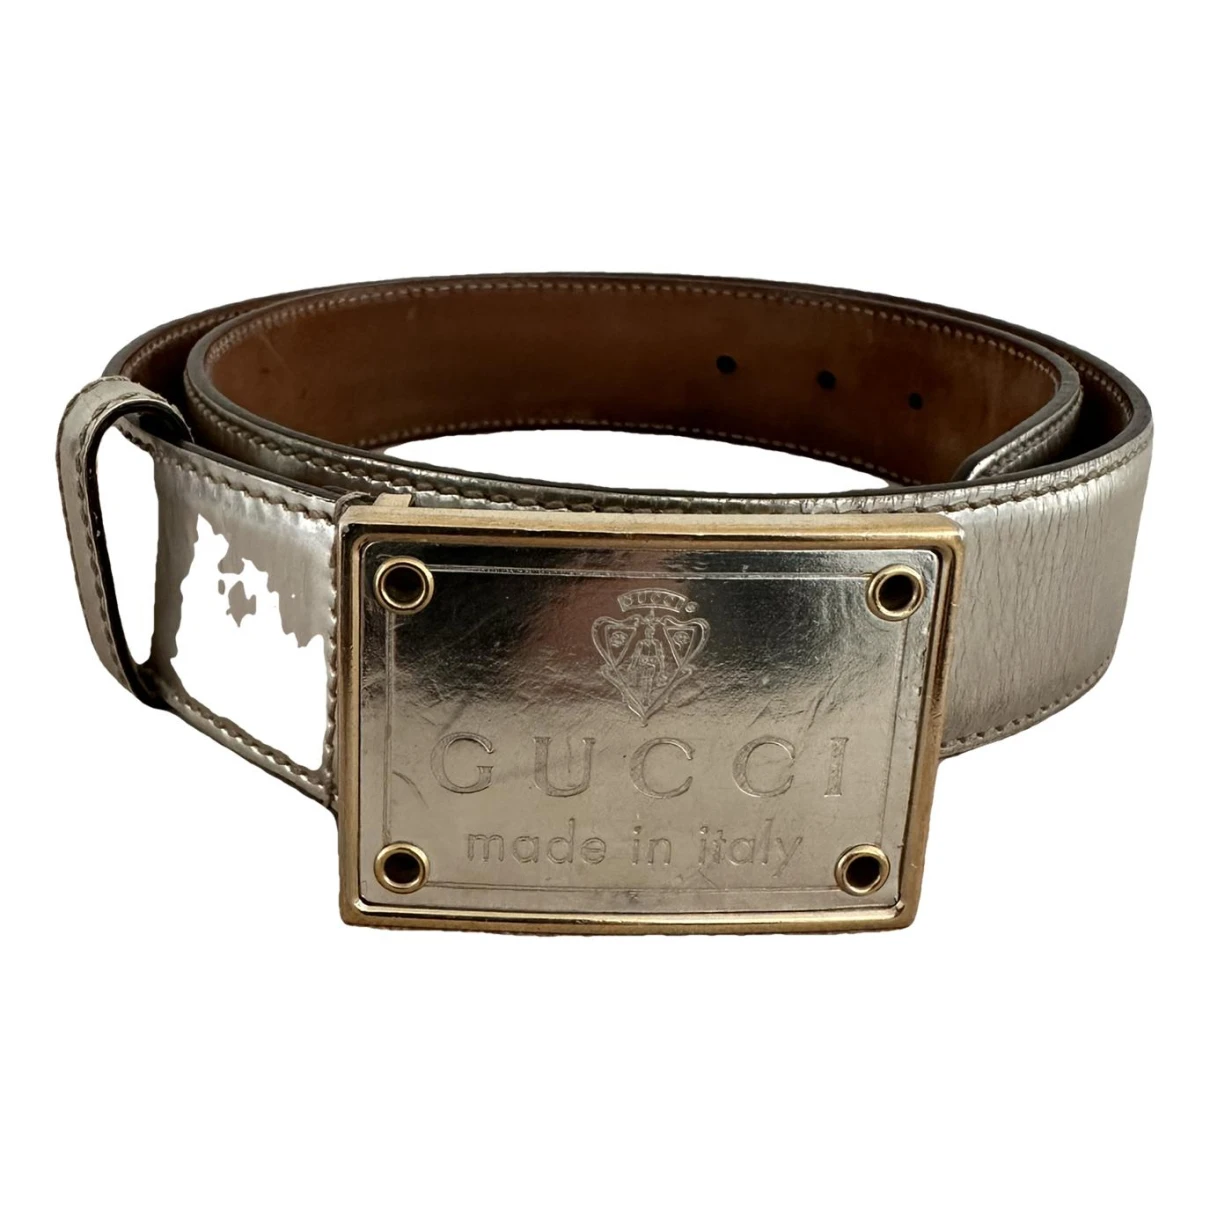 accessories Gucci belts for Female Leather 85 cm. Used condition